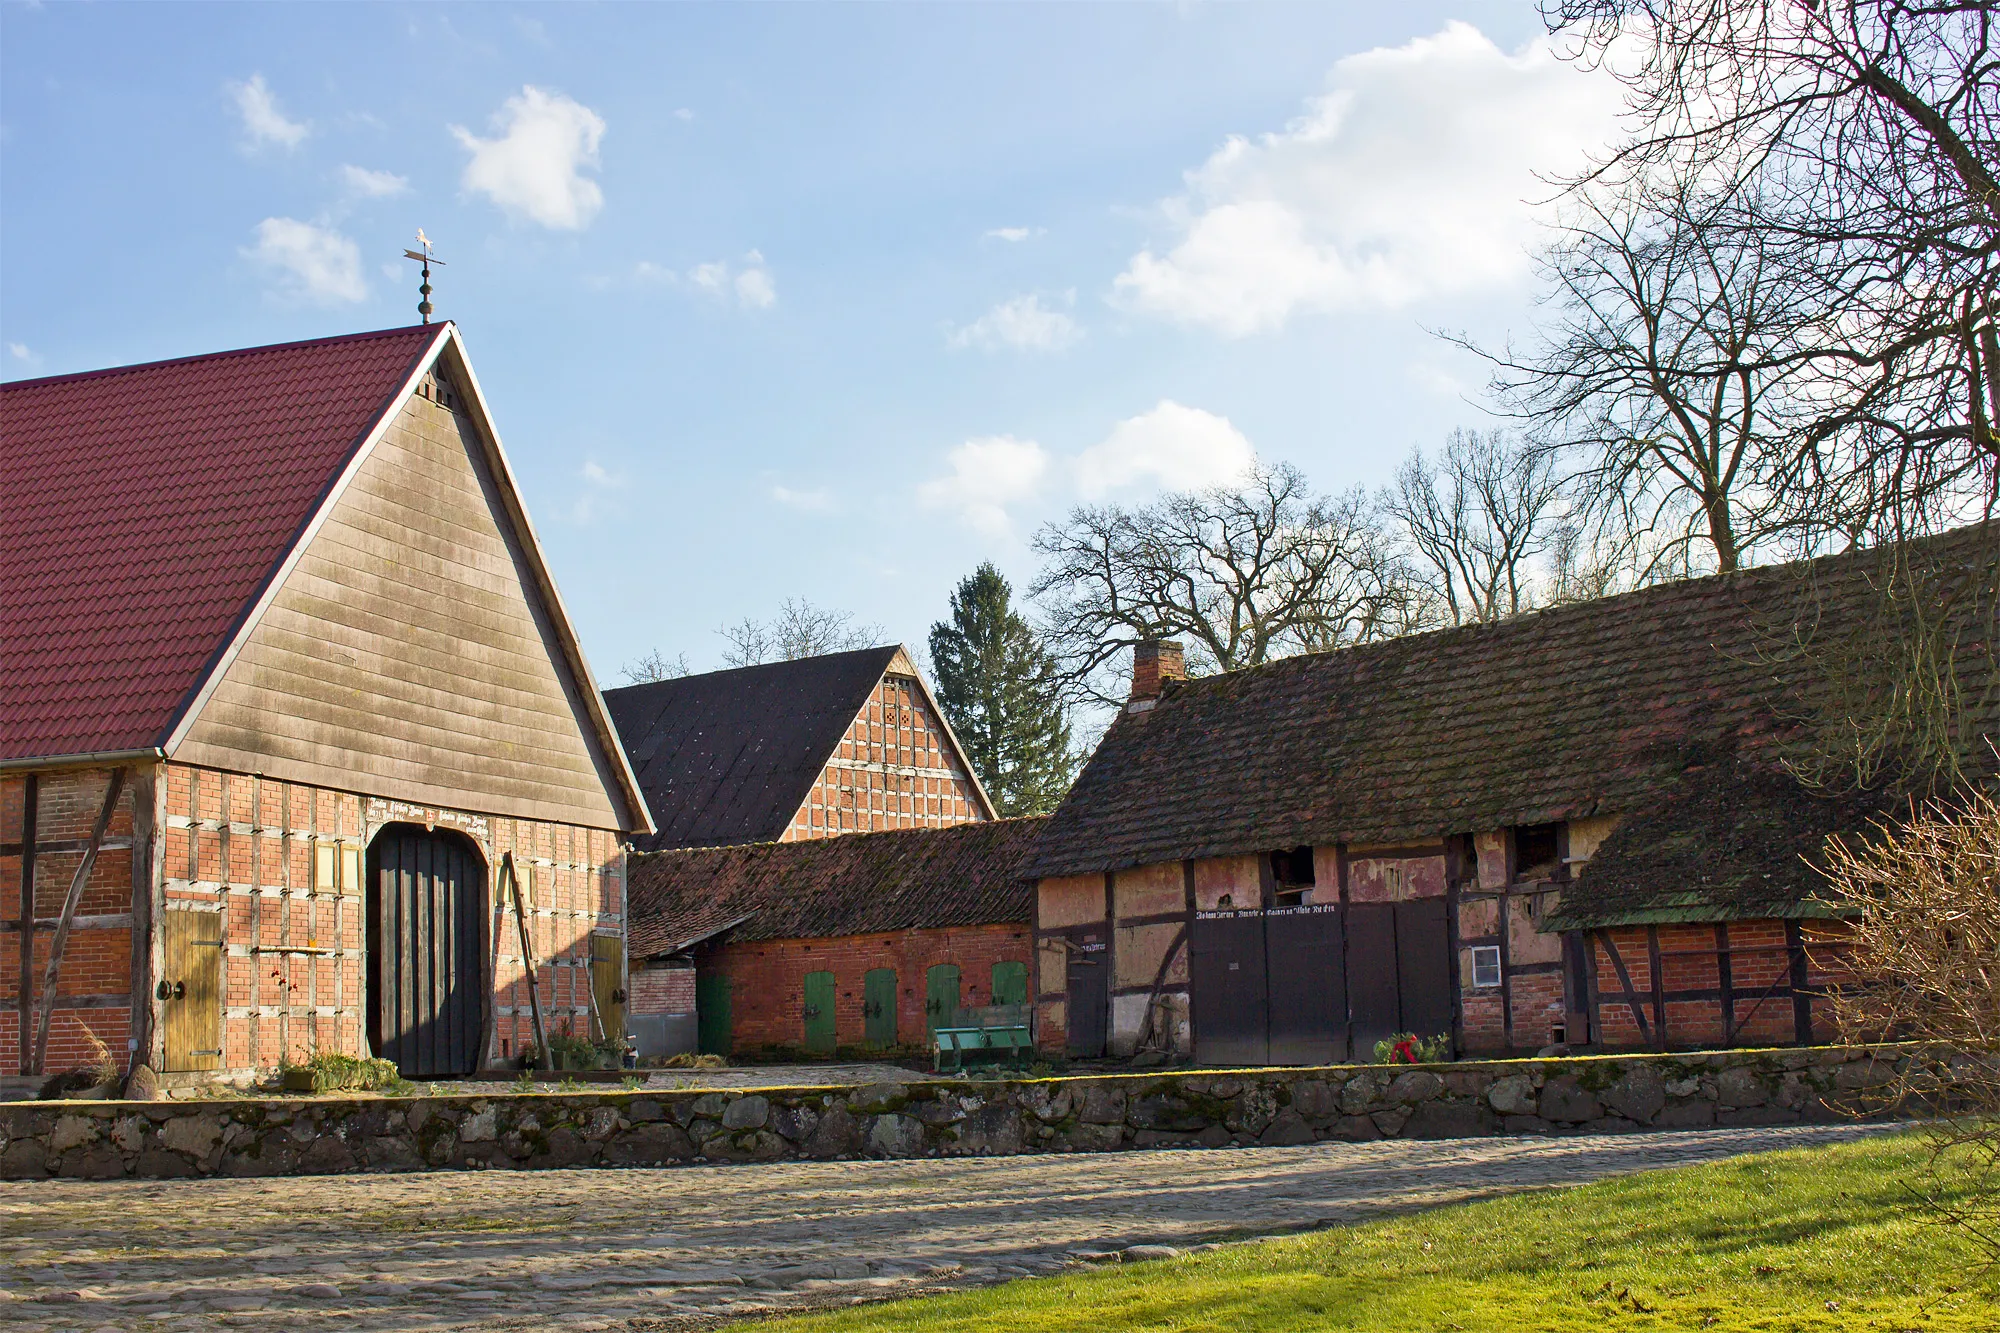 Photo showing: Cultural heritage monument "No 2" with shed in the village Jiggel near Bergen an der Dumme (district Lüchow-Dannenberg, northern Germany).